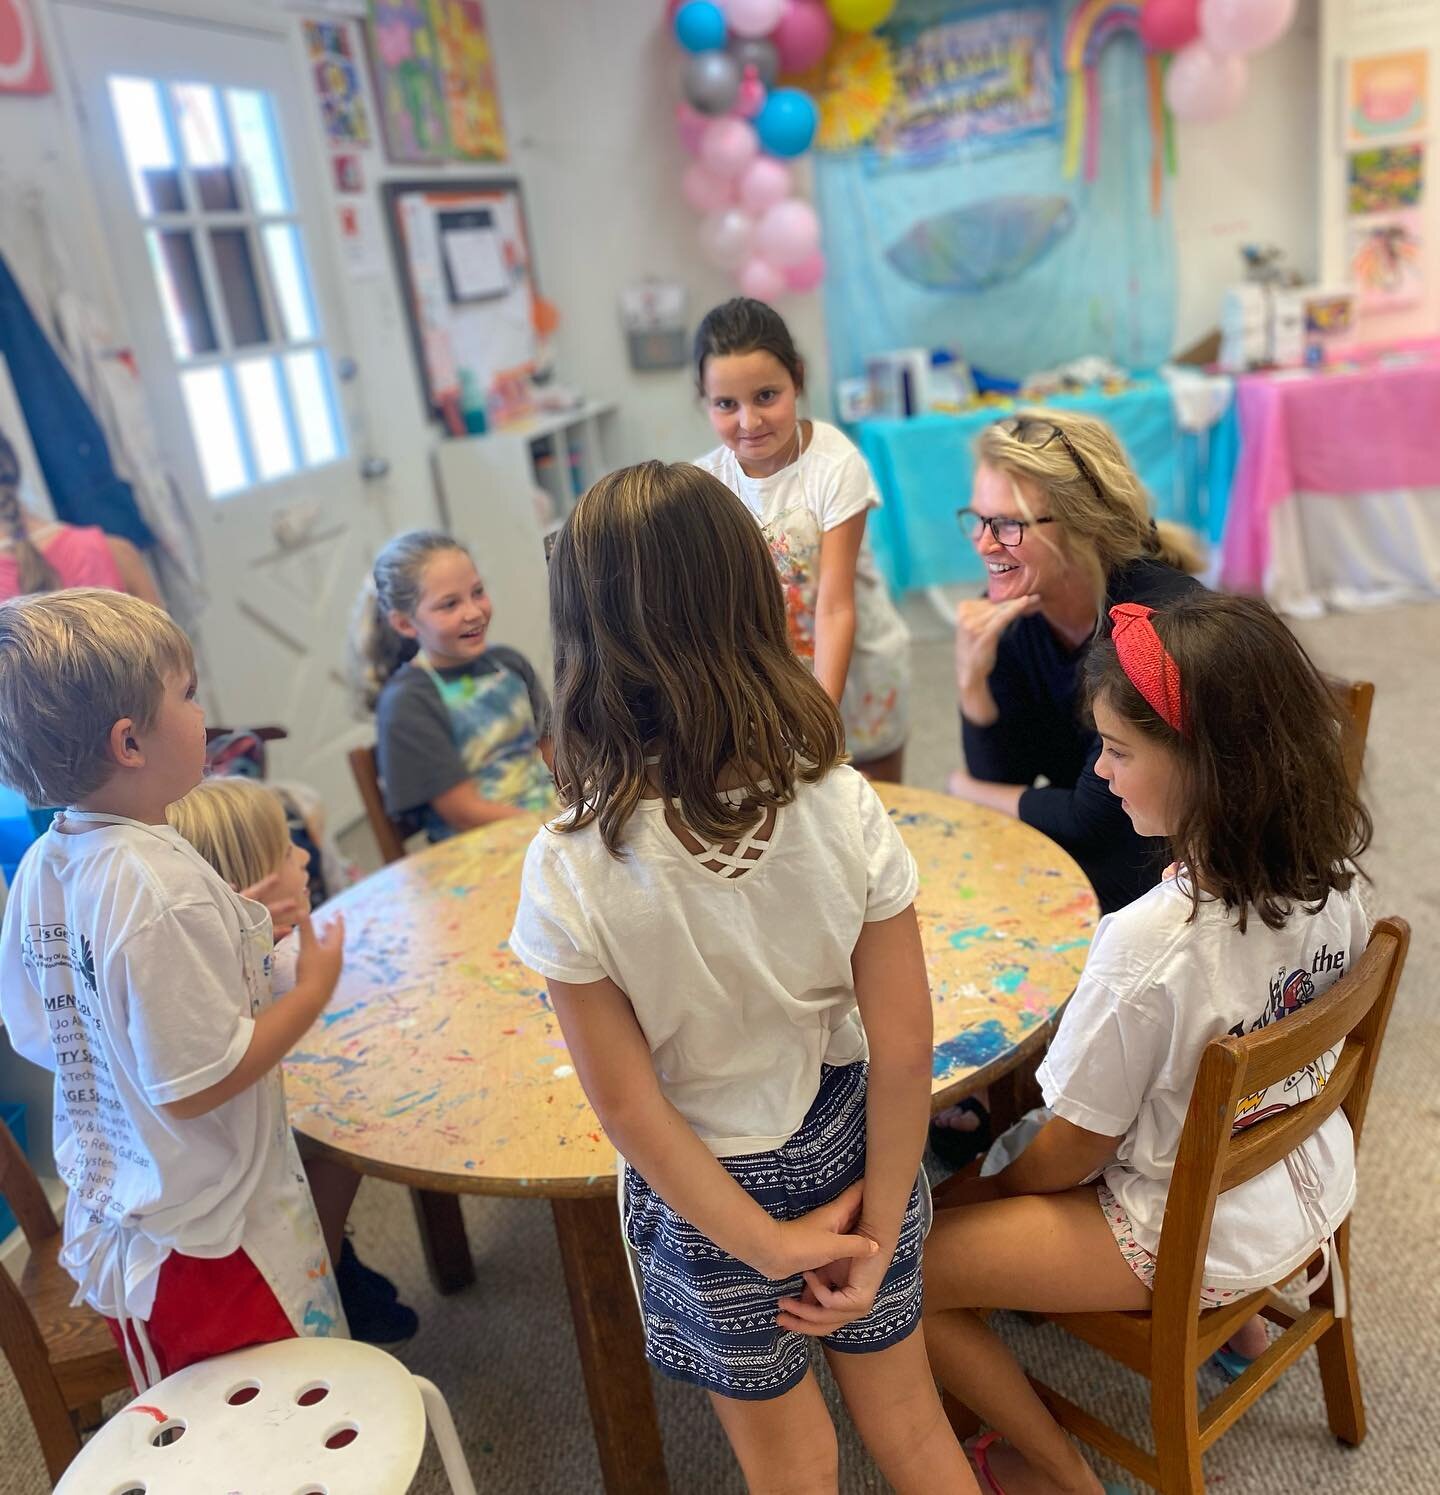 🟠🟧🧡A picture is worth a thousand words! In adoration of each other, young and old! @ashleyoc1966 #kidsart #kidsstudio #mobilealabama